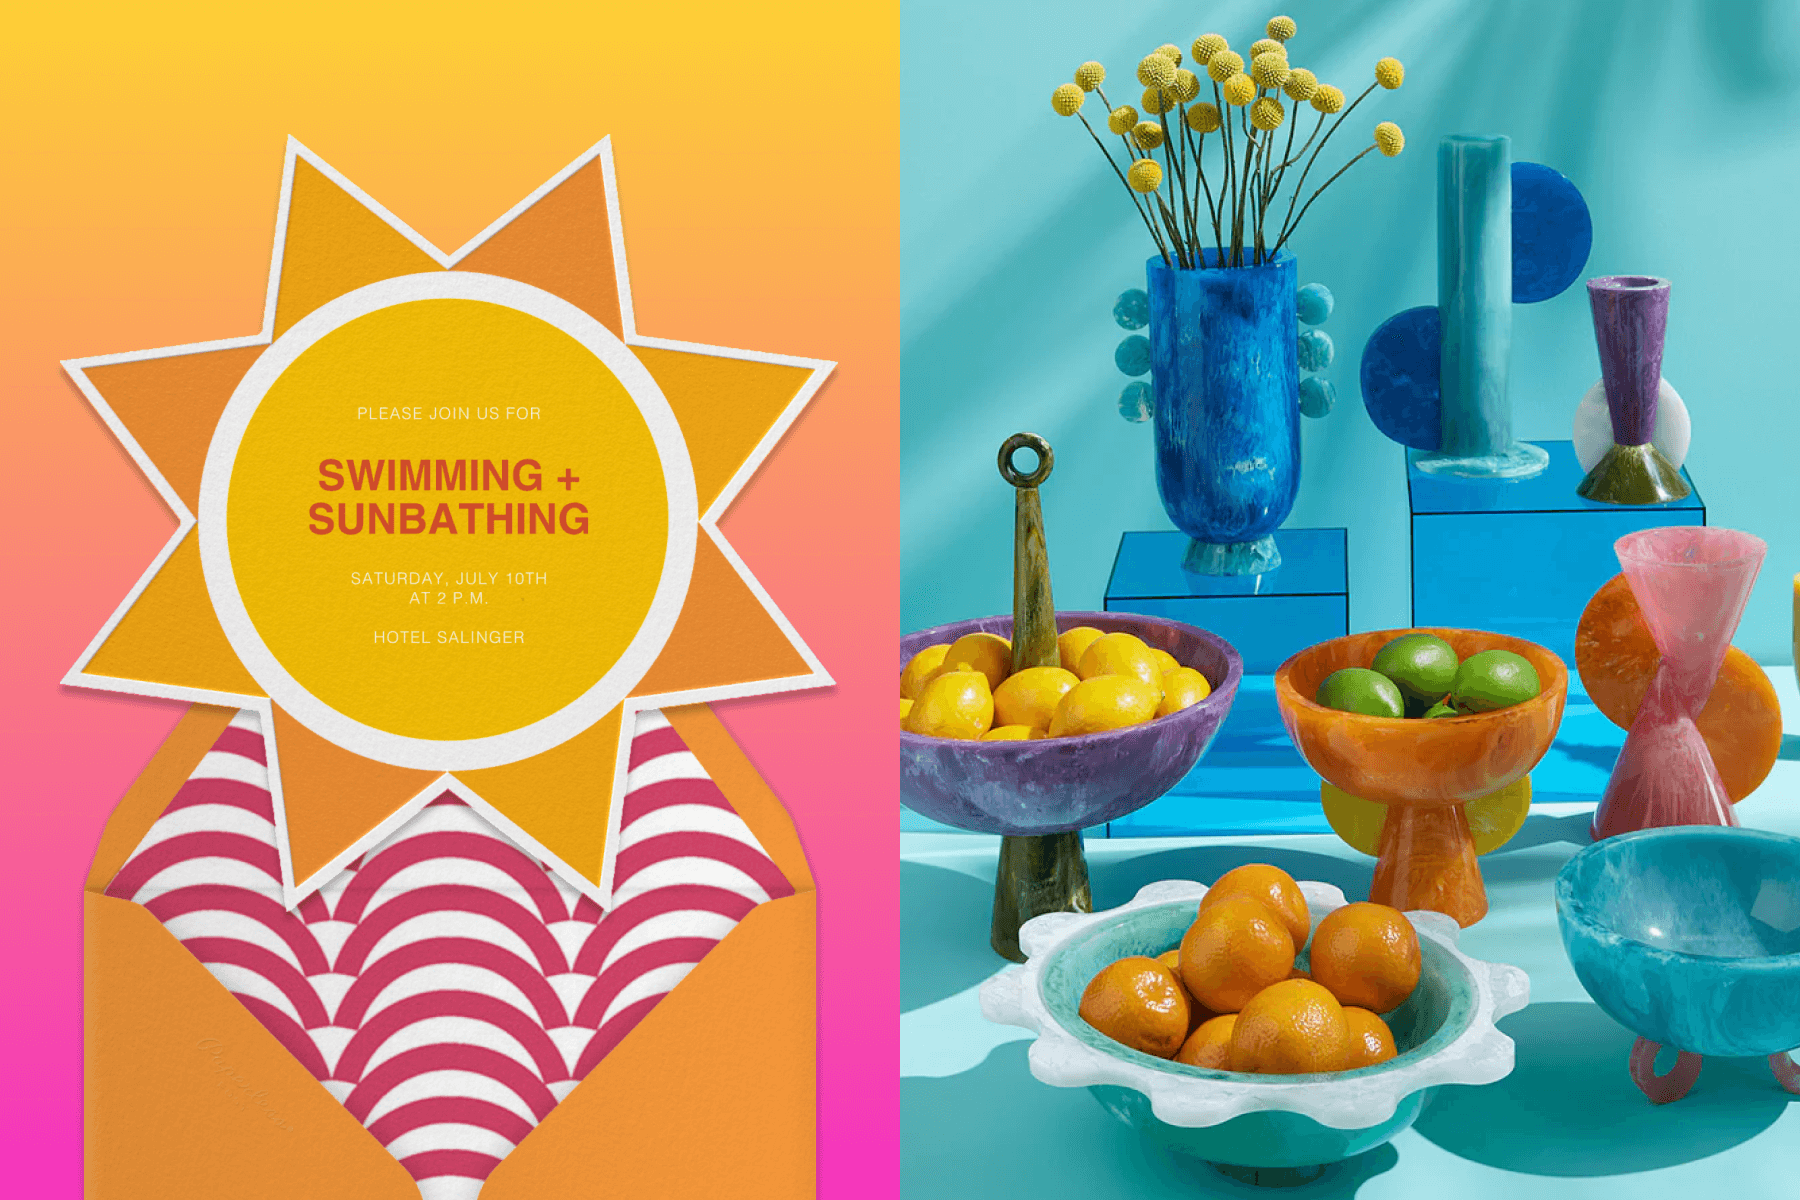 An invitation shaped like a sun on a pink and orange background; A blue table with colorful bowls of lemons, limes, oranges, and colorful vases. 